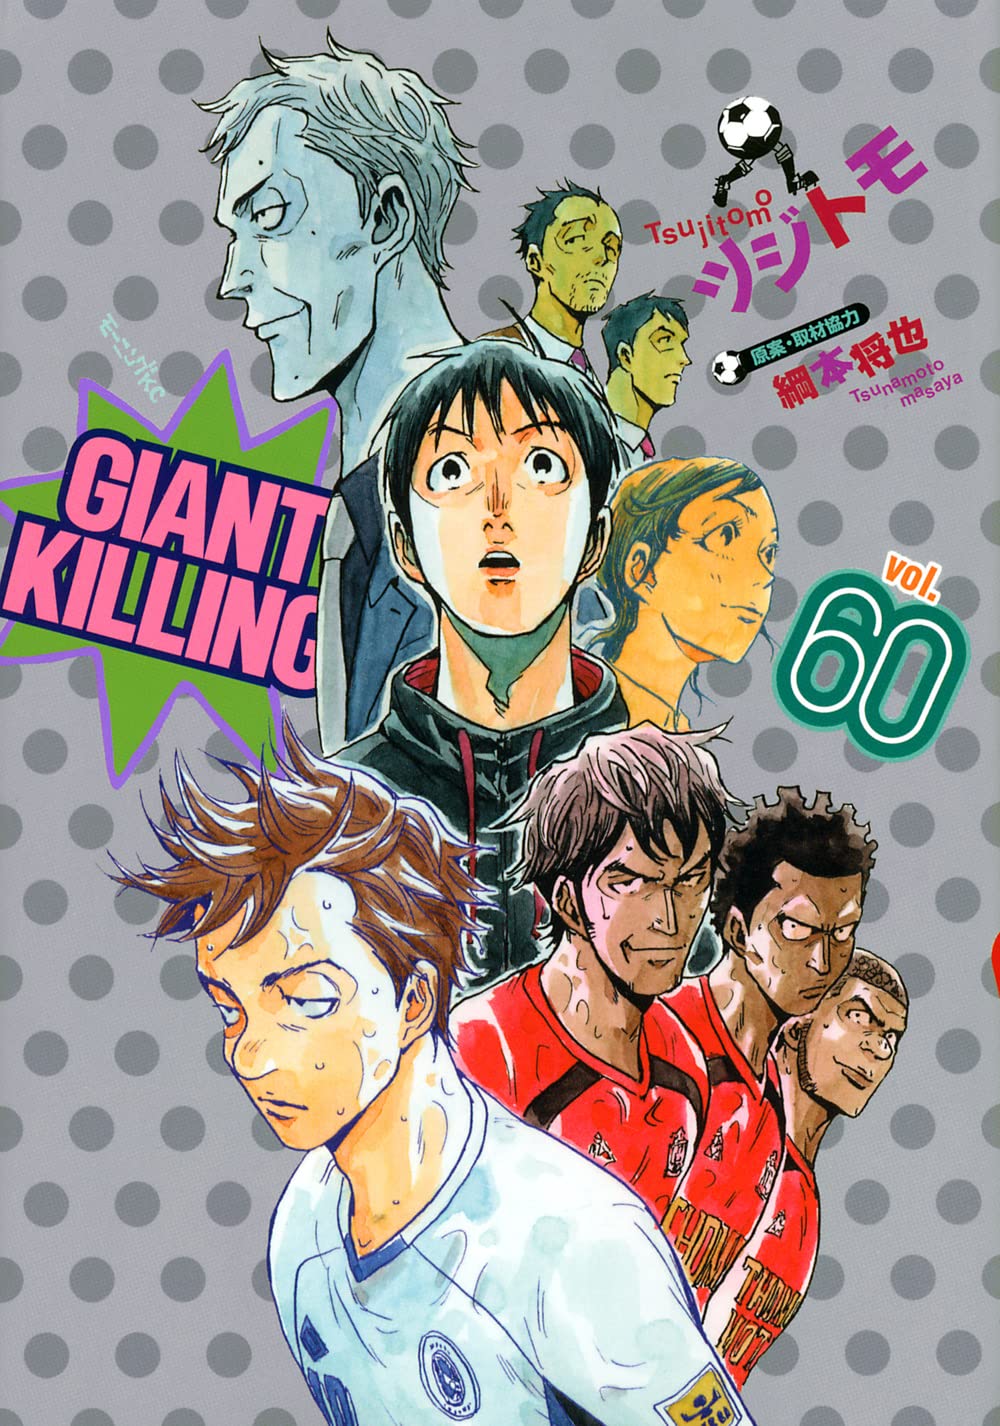 Giant killing capitulo 15, By Giant killing